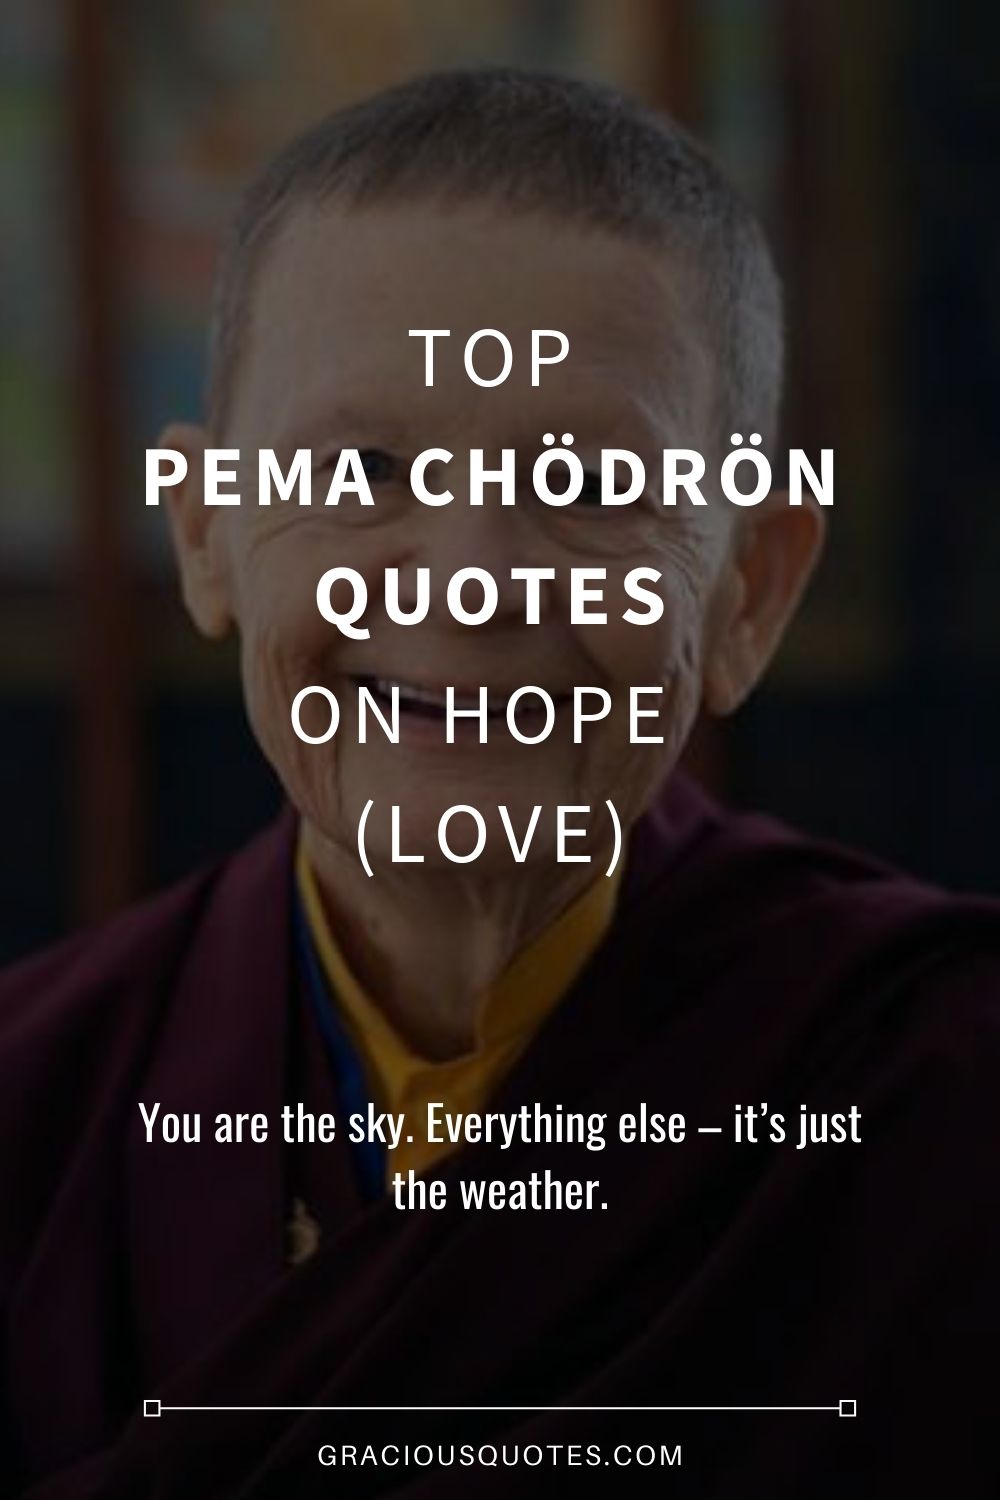 Top Pema Chödrön Quotes on Hope (LOVE) - Gracious Quotes